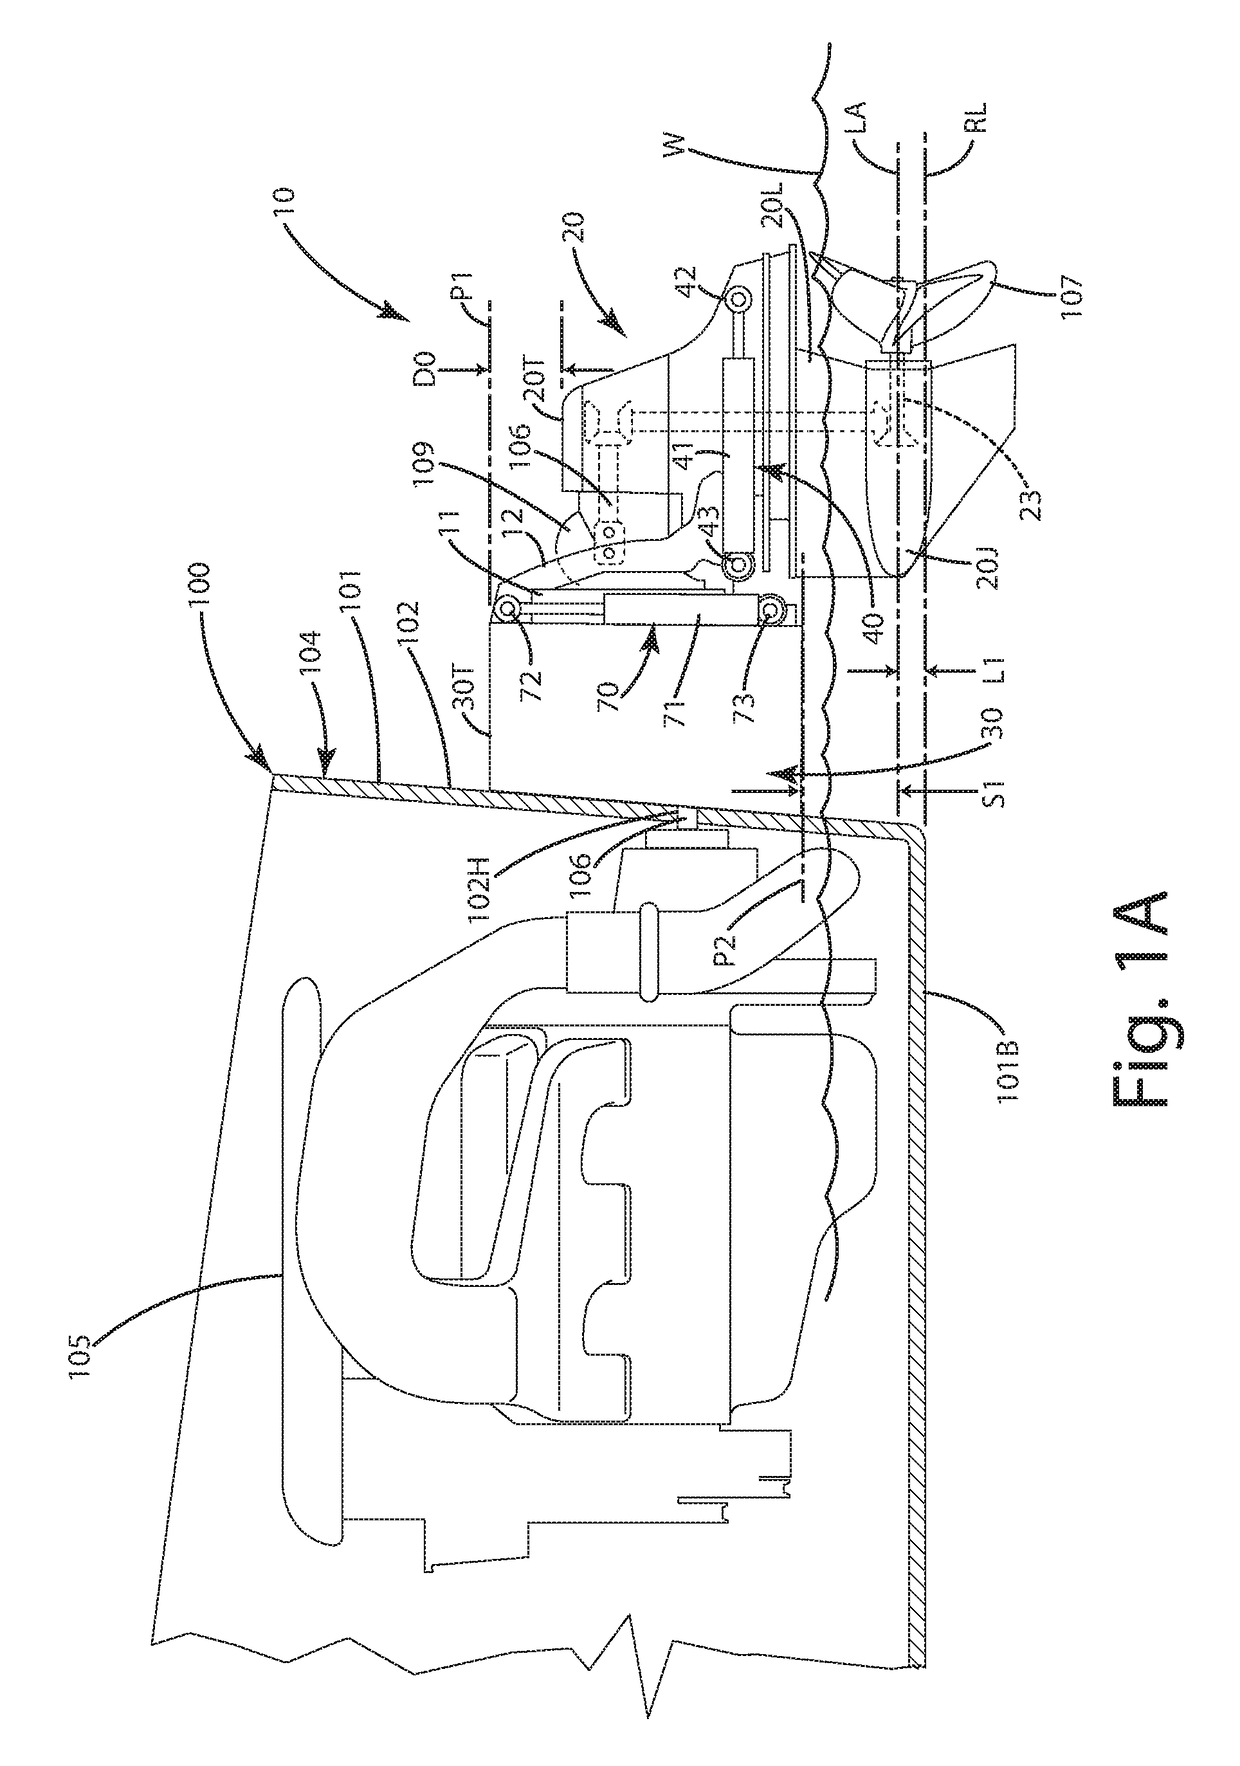 Watercraft adjustable shaft spacing apparatus and related method of operation